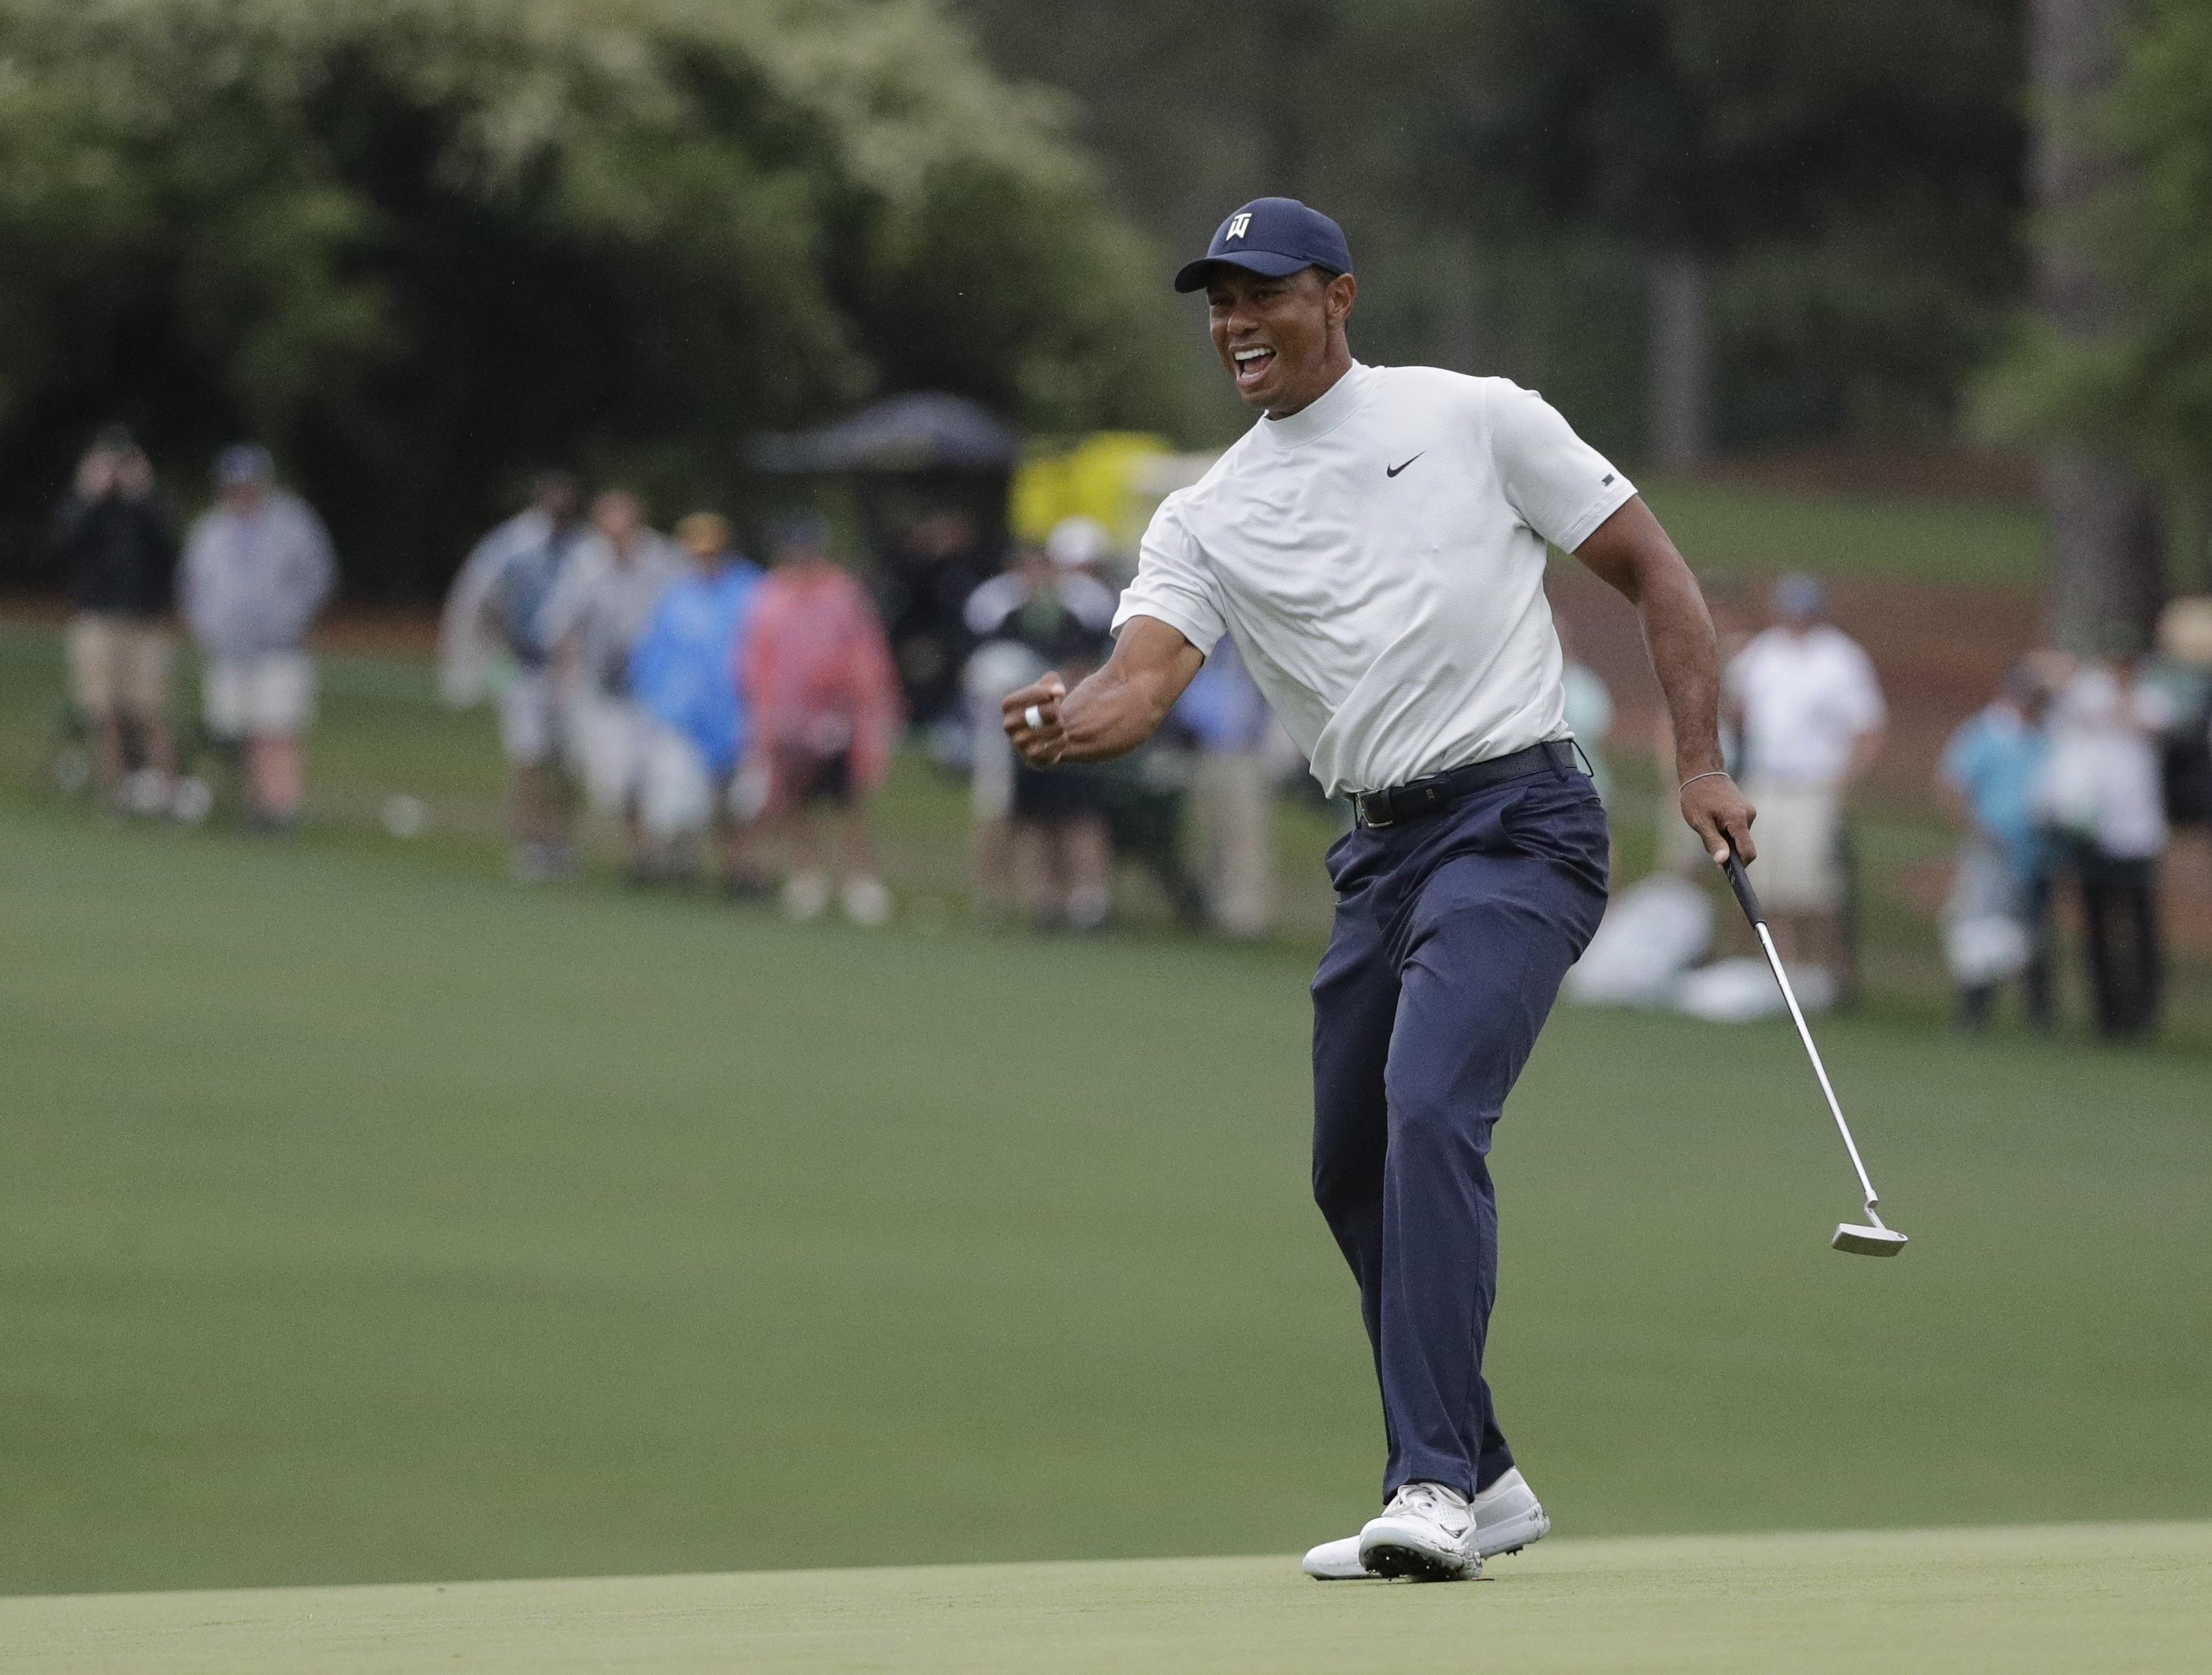 Tiger Woods makes a Masters logjam look even larger The SpokesmanReview